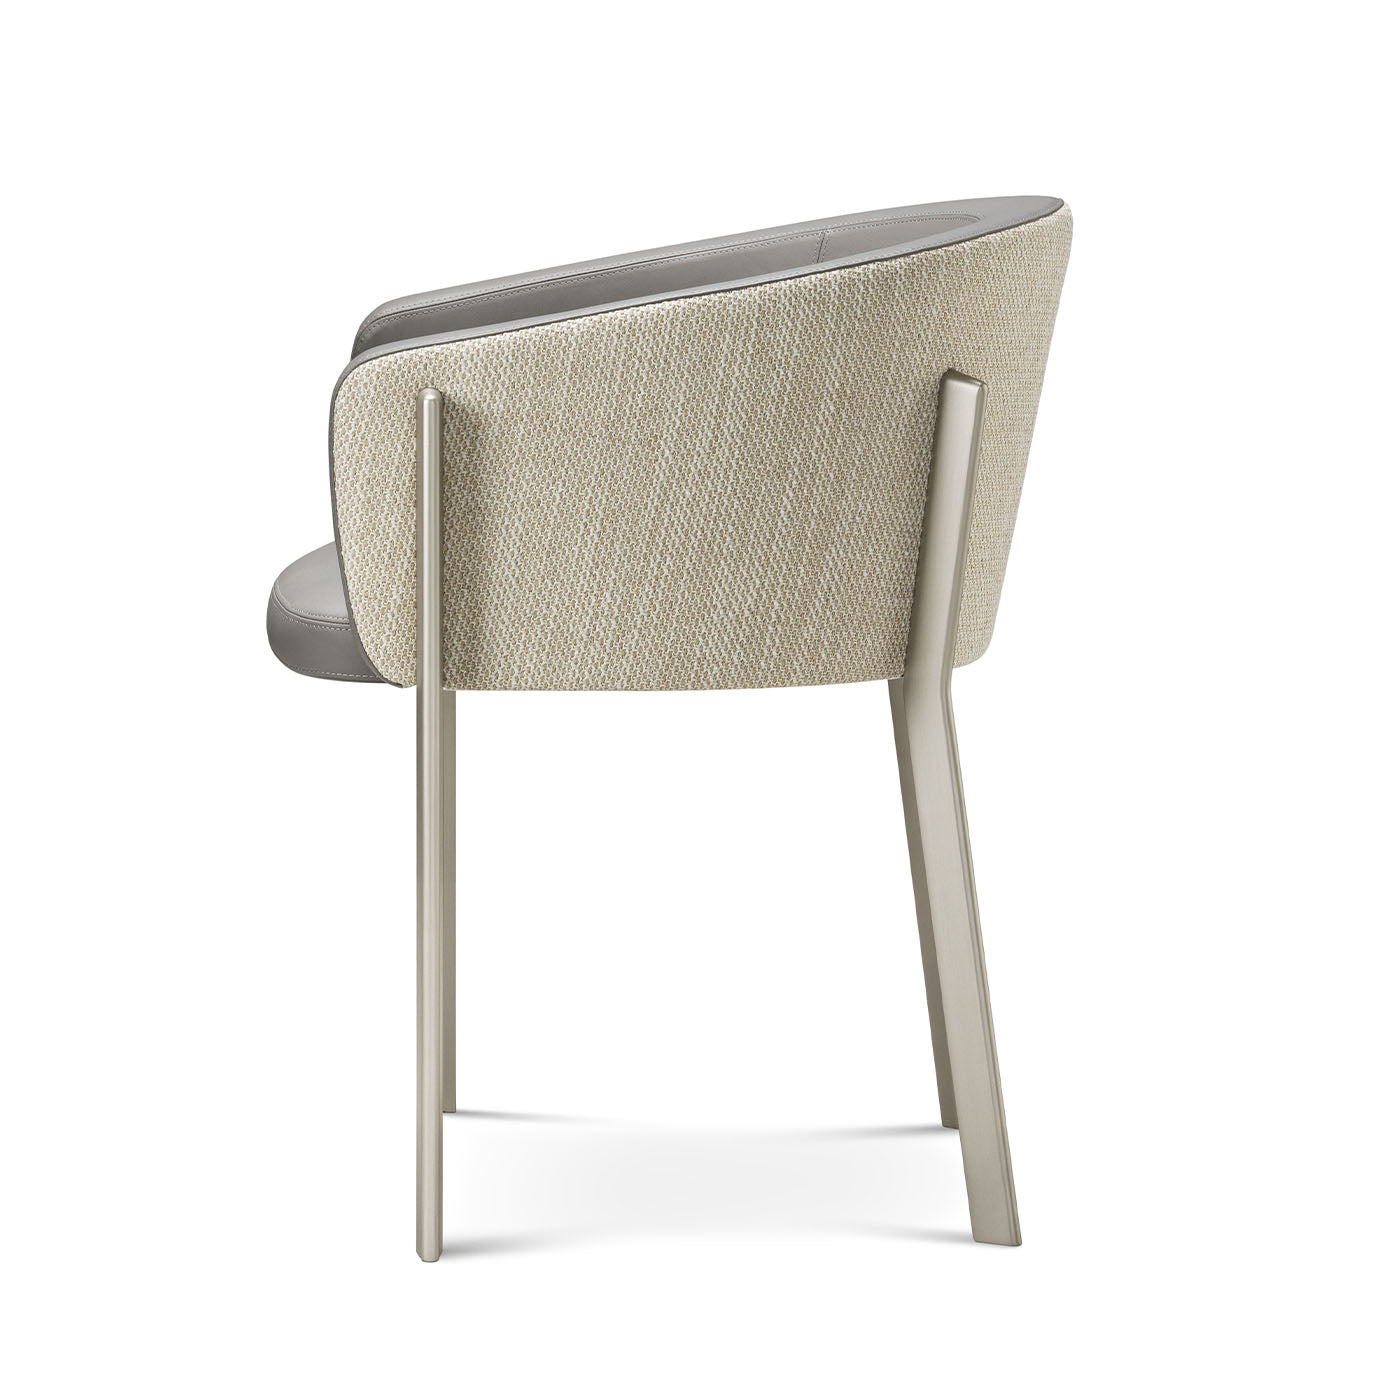 Arch Gray Leather Armchair by Richard Hutten - Alternative view 3